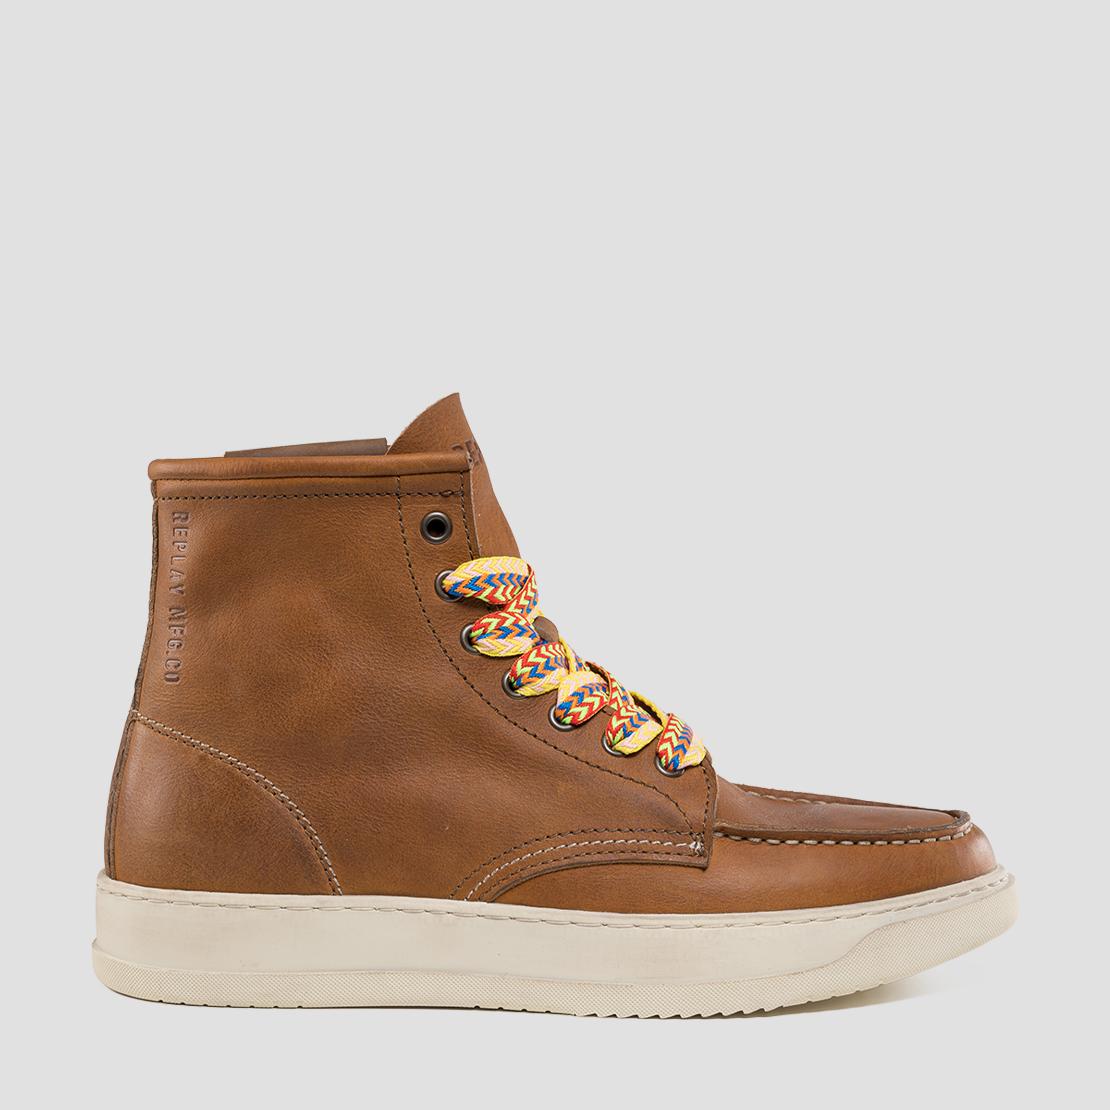 COGNAC MID-CUT – Riva LEATHER STATUS Menswear REPLAY RELOAD BOOTS